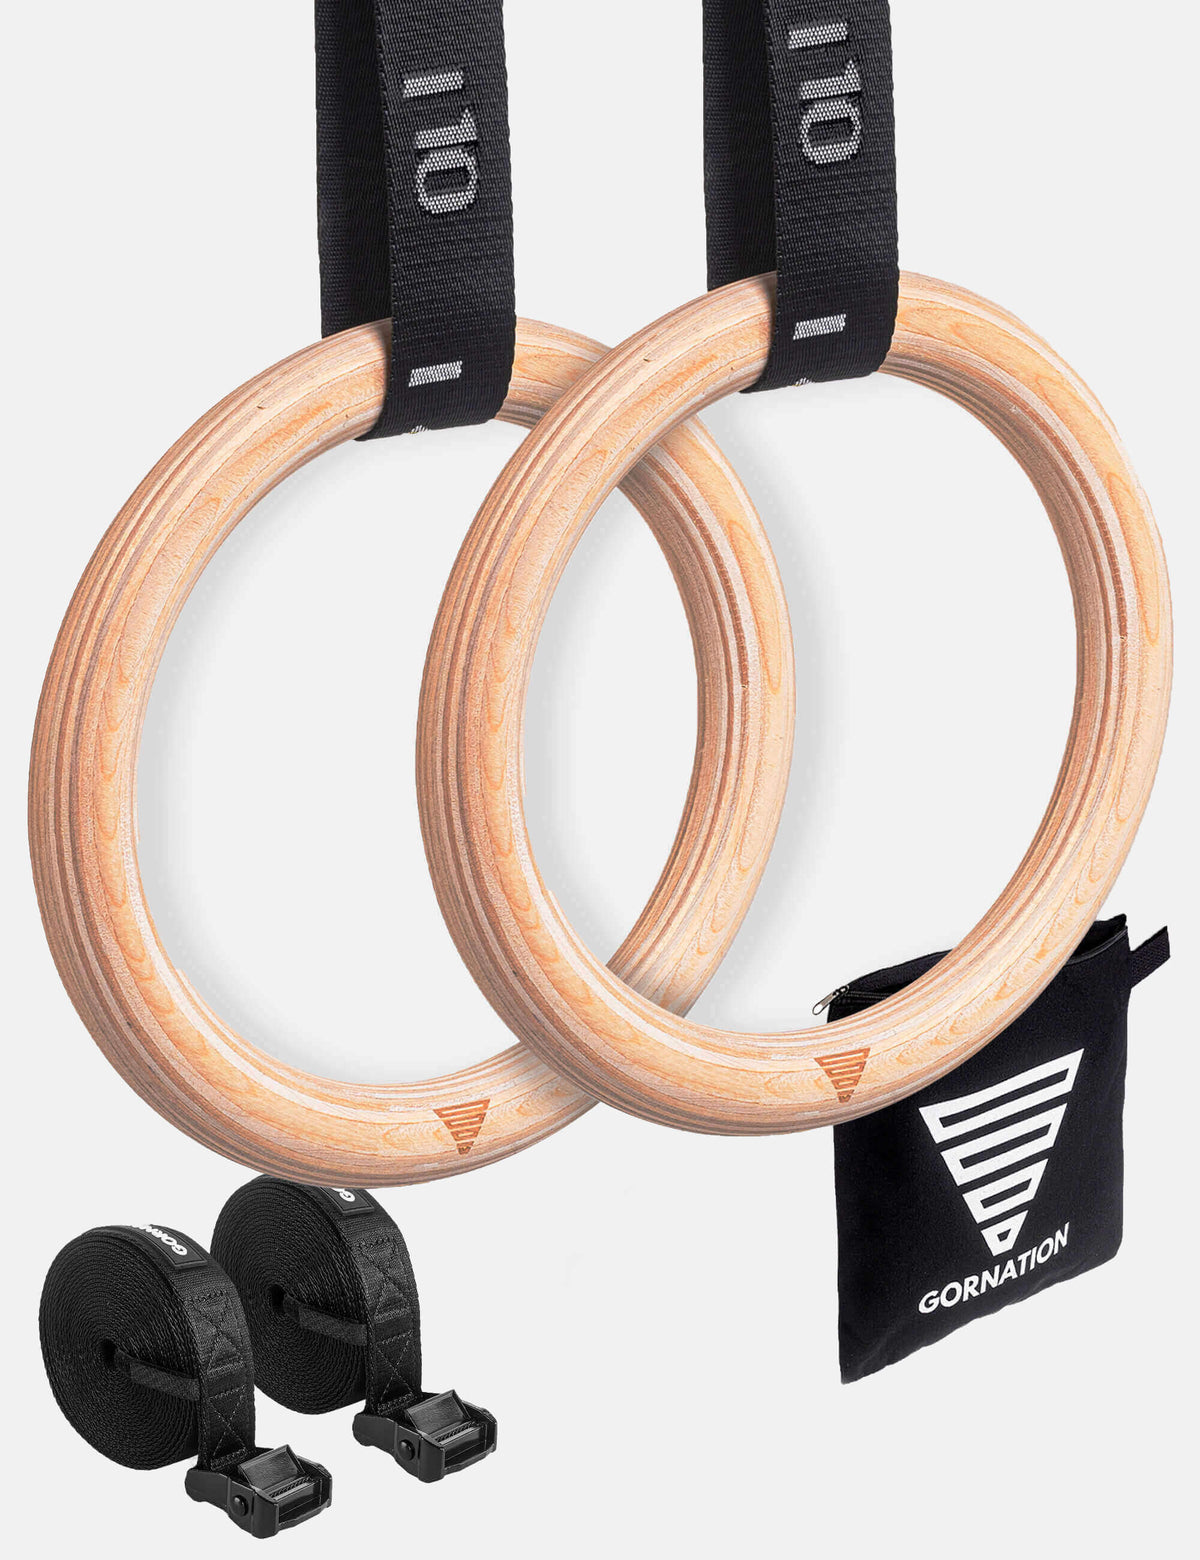 GORNATION Workout Rings Set with high quality straps, dual door anchor and a carry bag, gymnastic rings, turnringe, Anneaux, Anelli